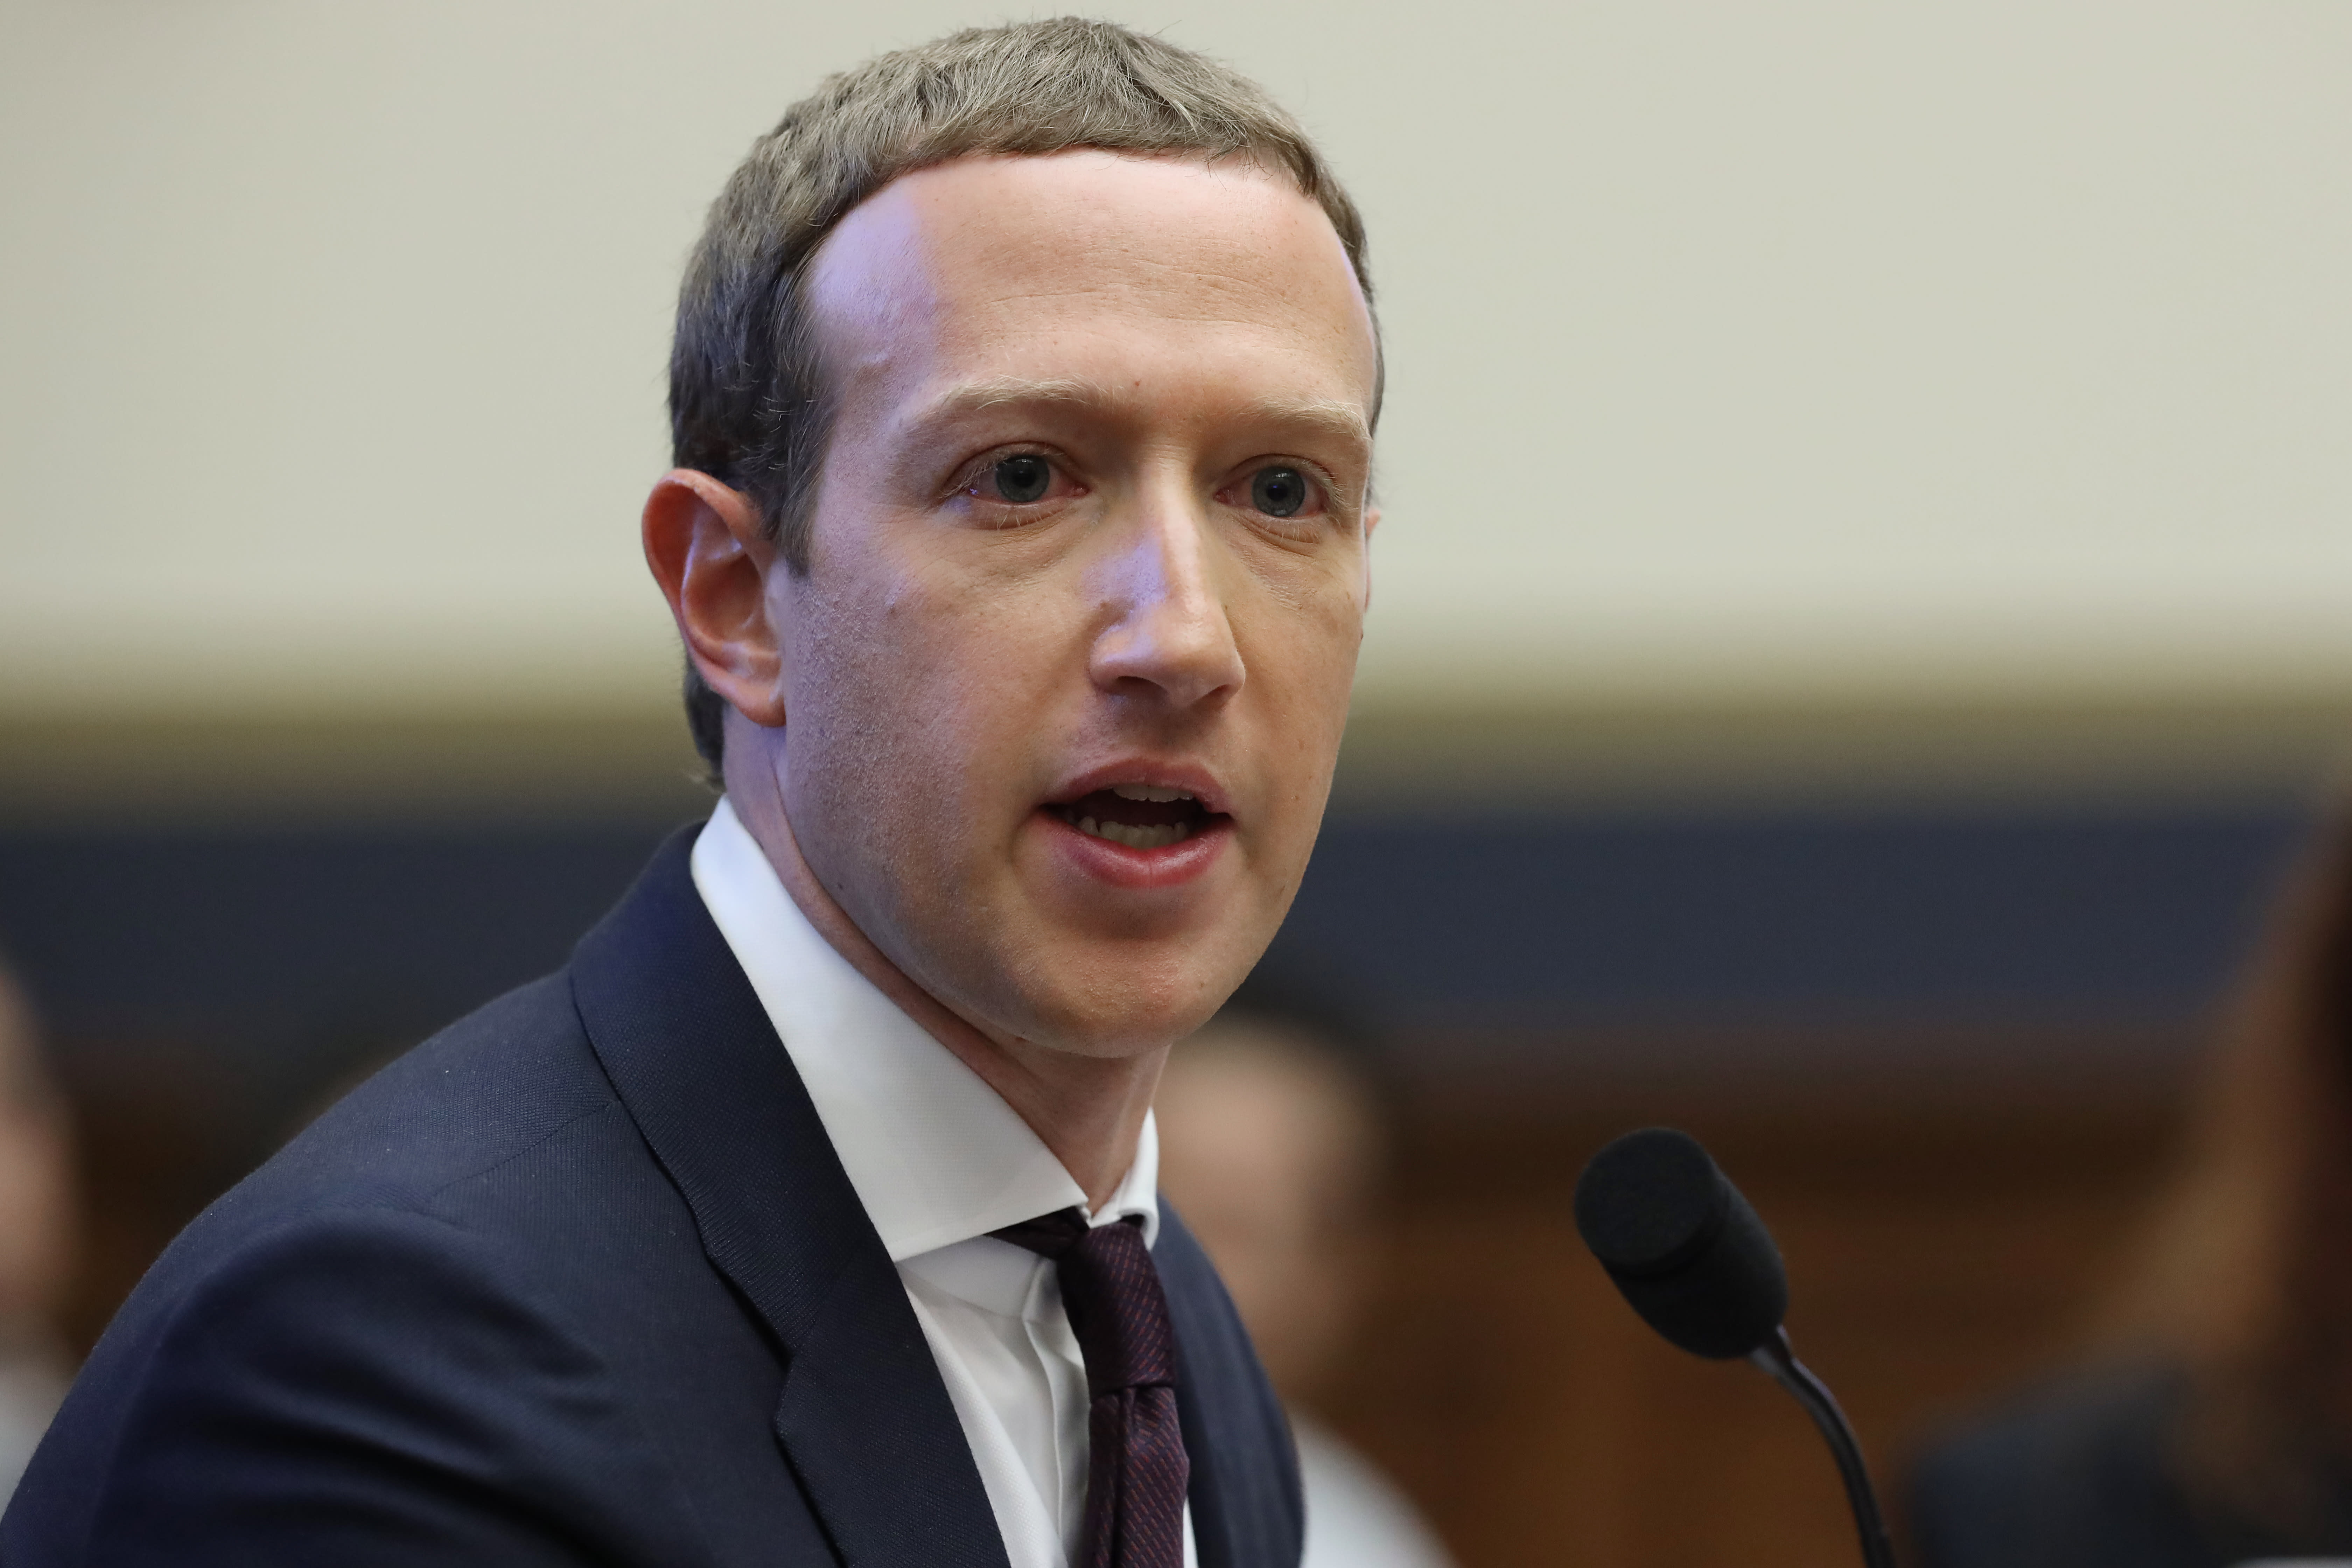 Facebook's Libra cryptocurrency project has failed in its current form, says Swiss president